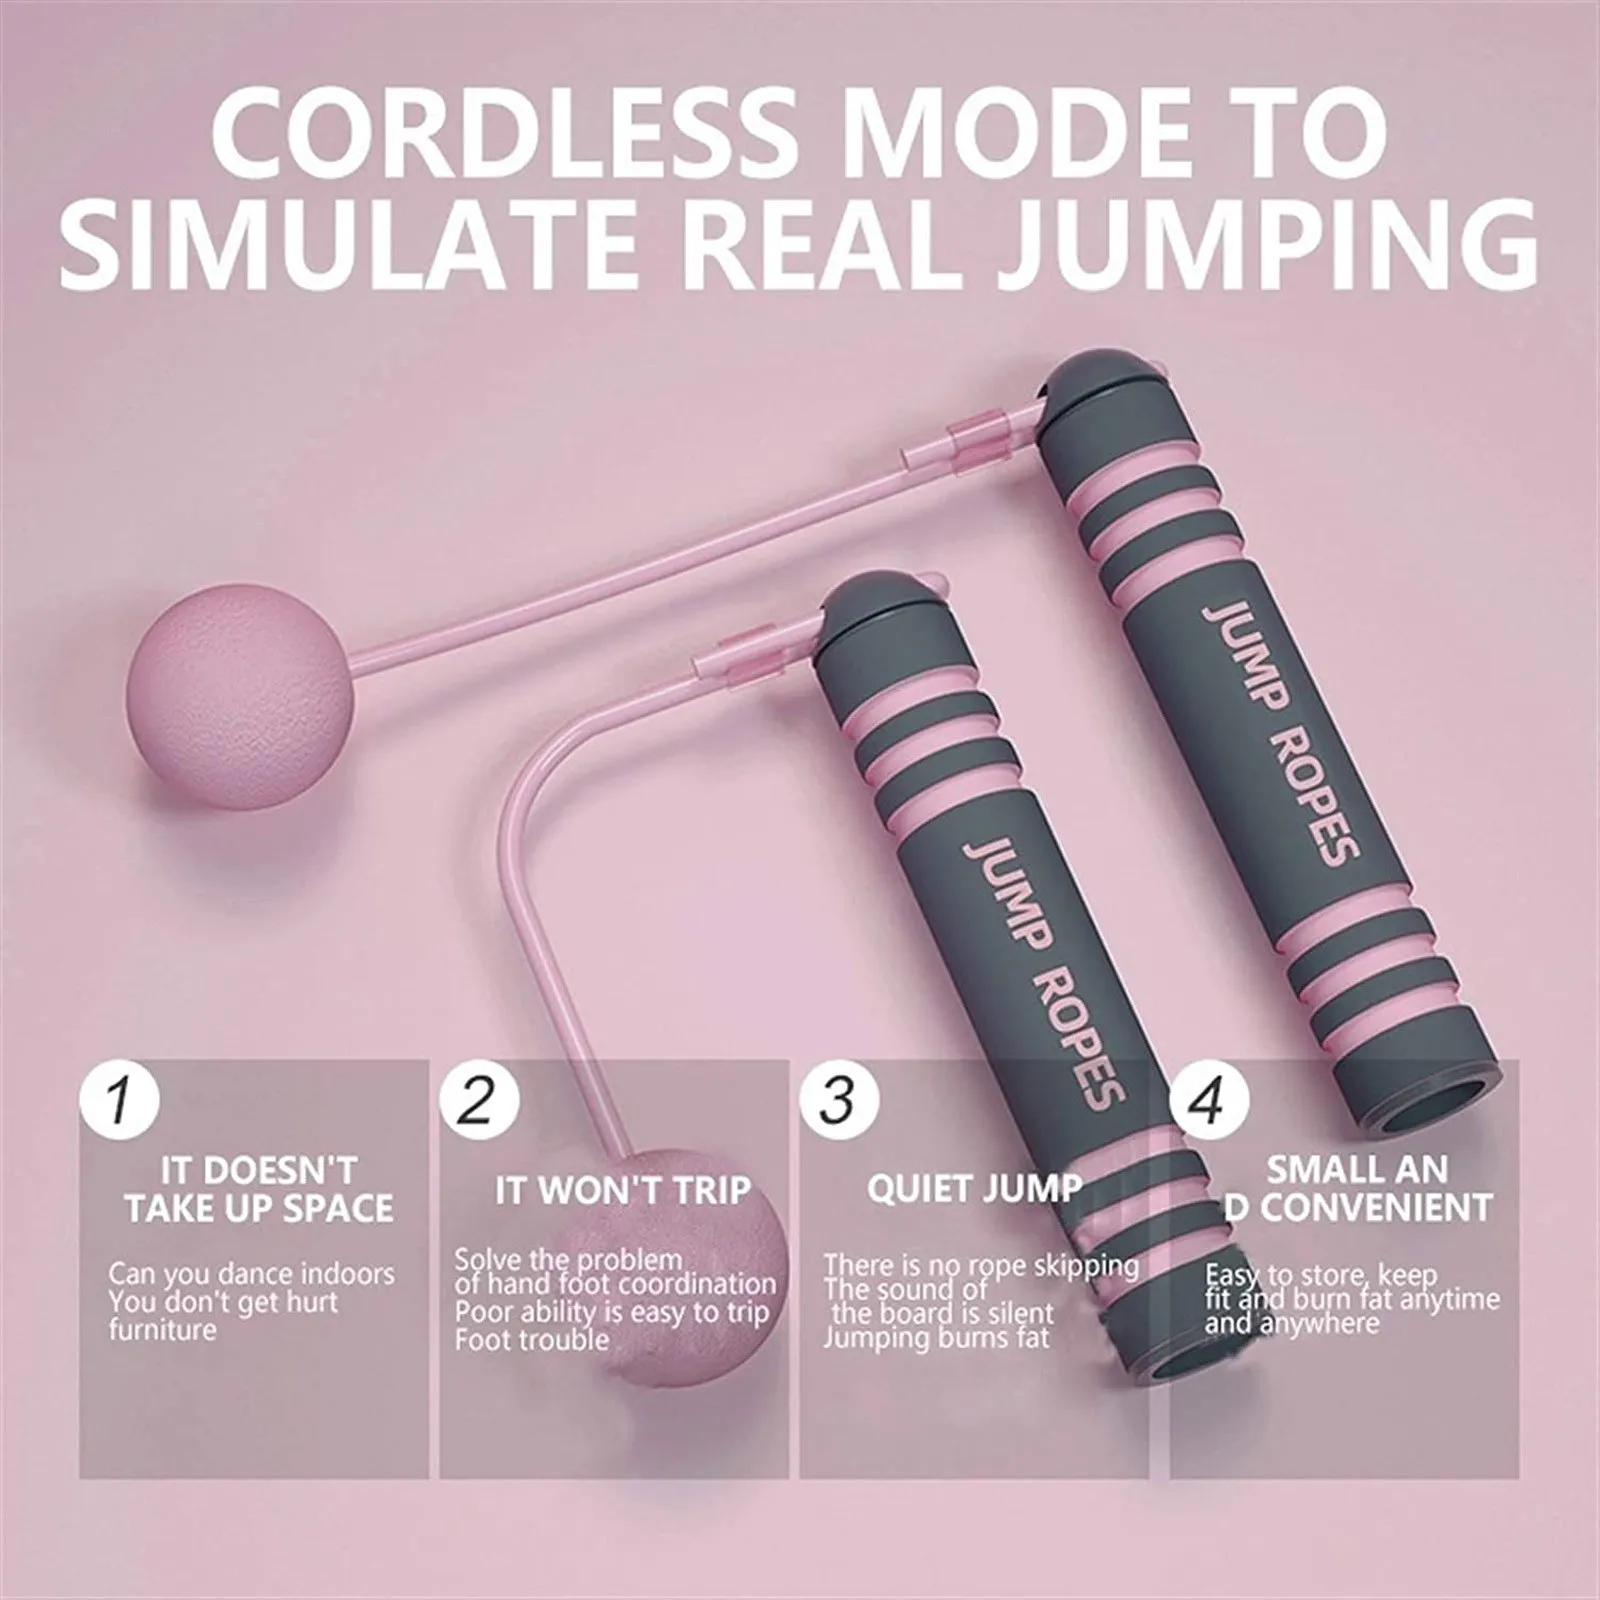 2021 Cordless Skipping For Fitness No Tangles Speed Cordless Skipping Unisex Portable Ffitness Equipment Skip Rope